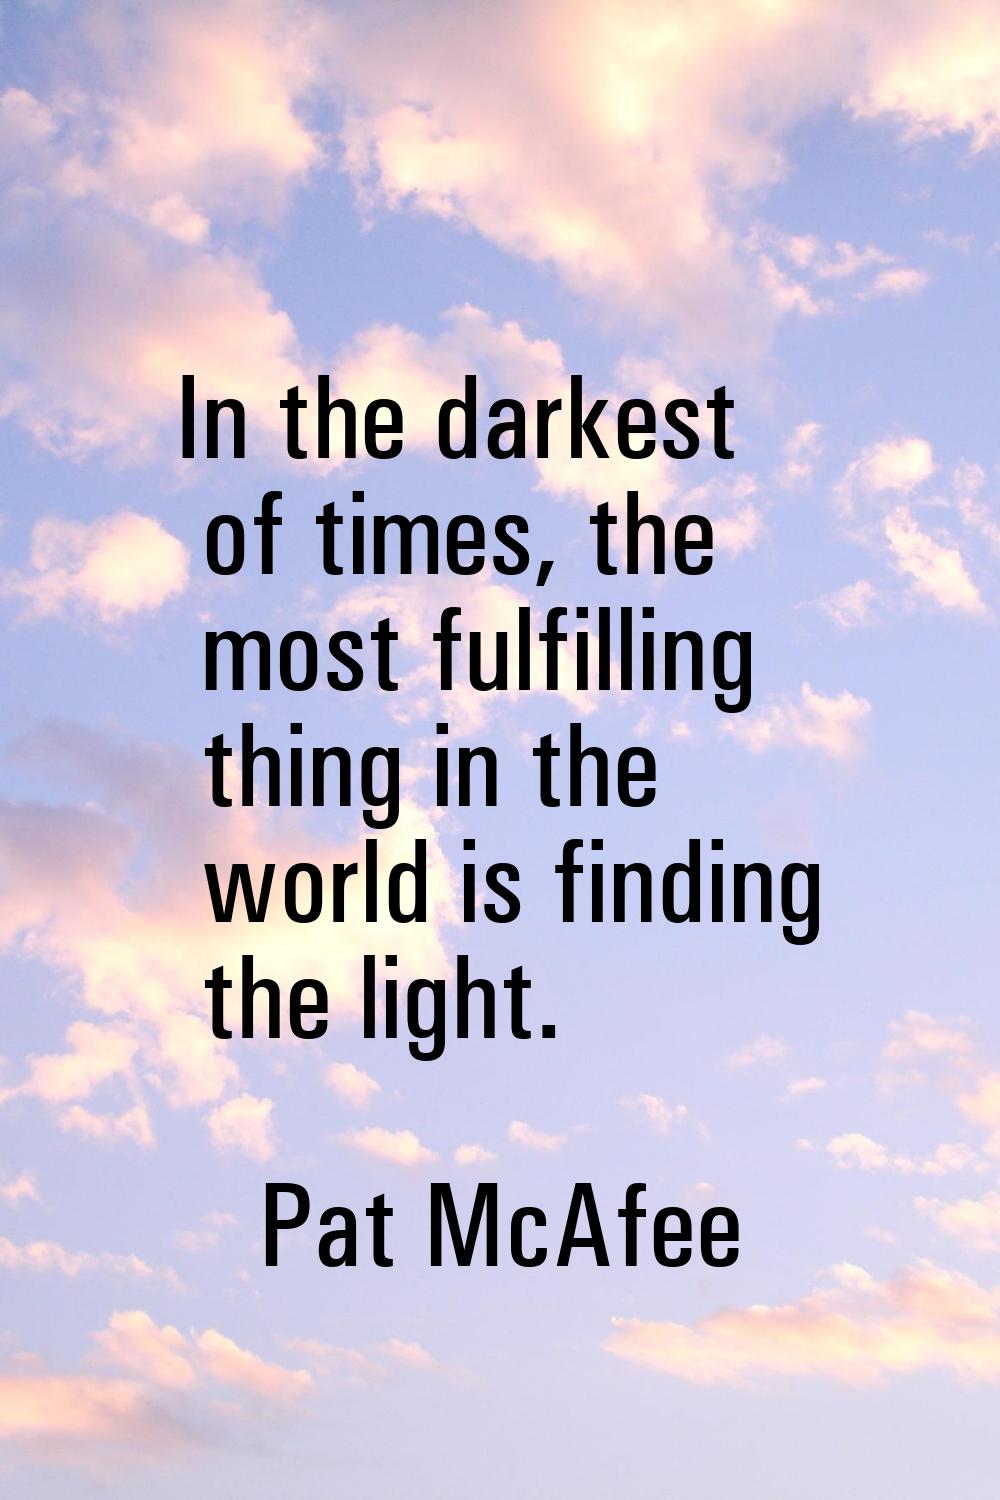 In the darkest of times, the most fulfilling thing in the world is finding the light.